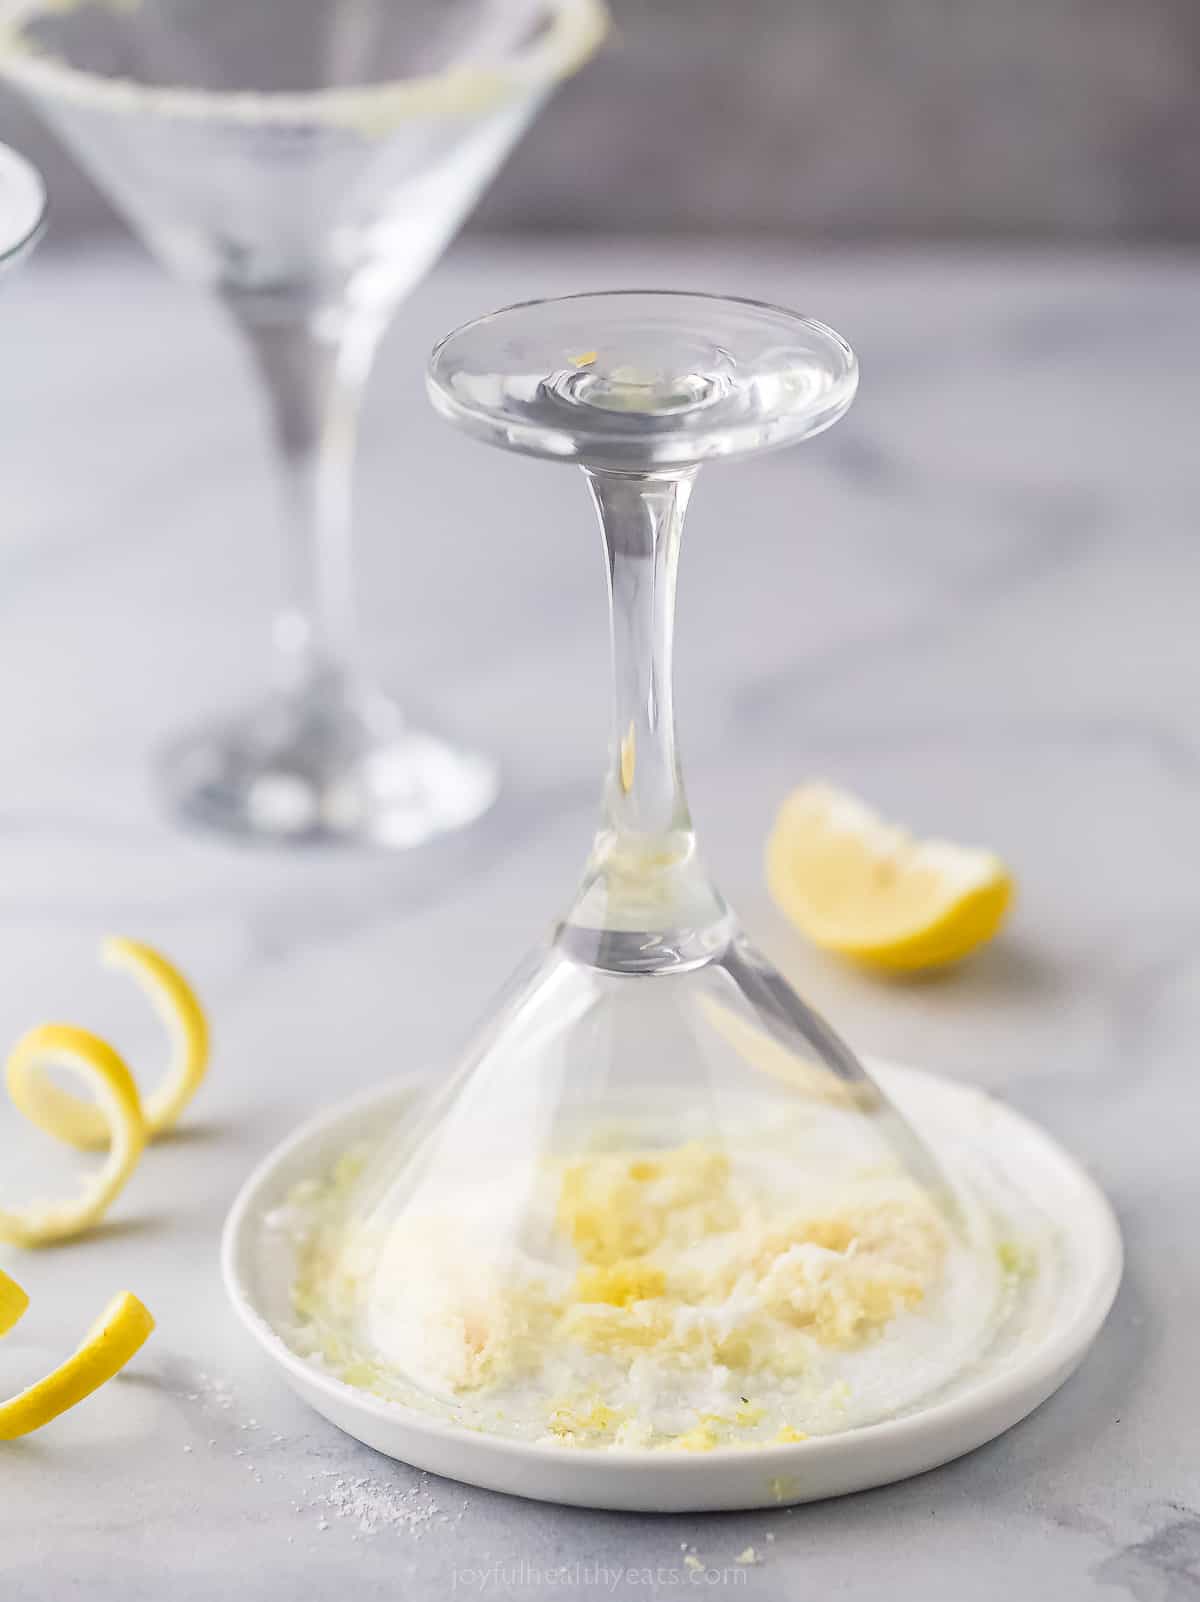 dipping a martini glass upside down into a plate with sugar to make a sugared rim